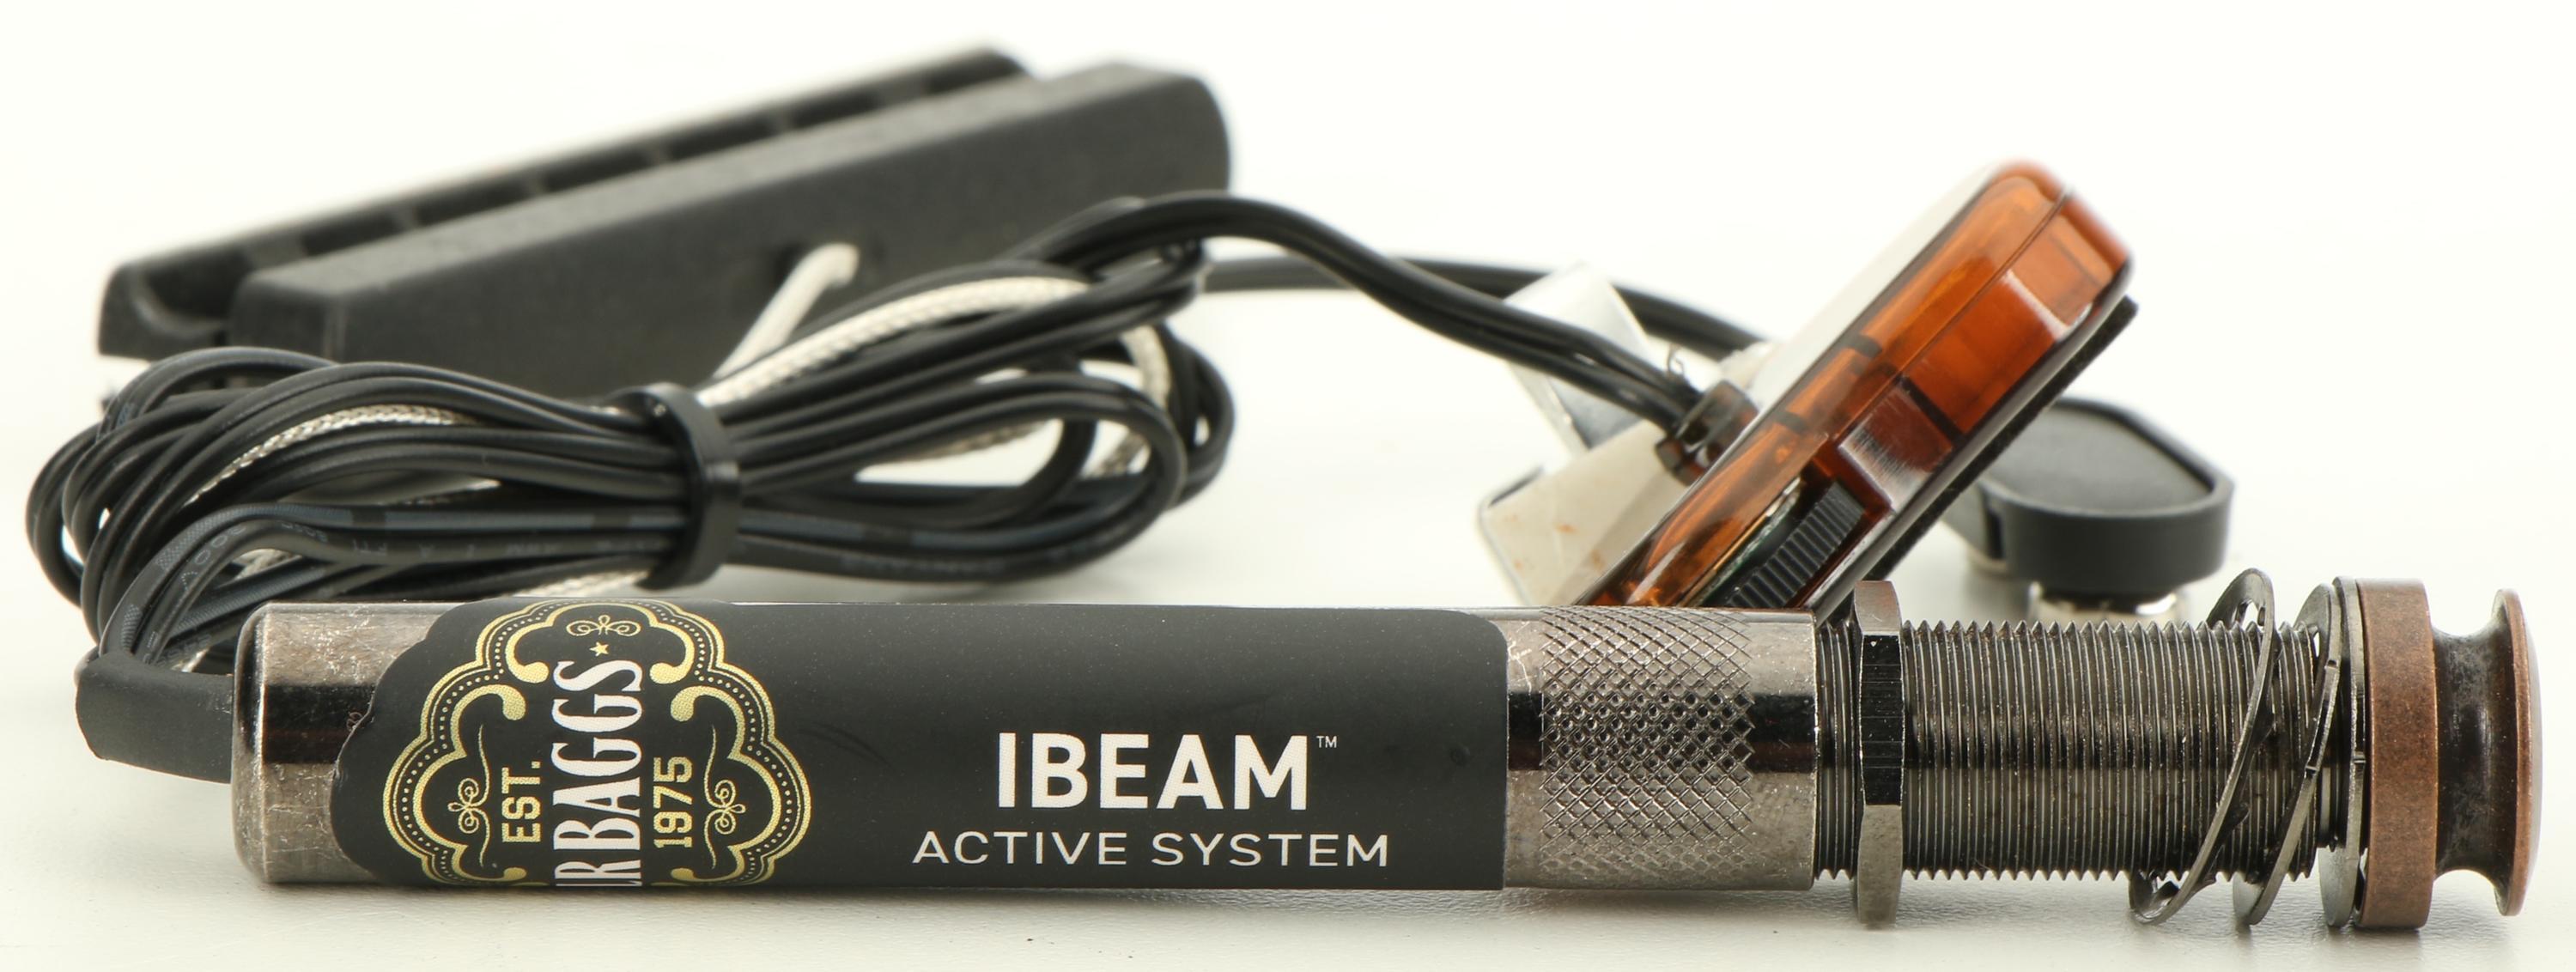 LR Baggs iBeam Active Acoustic Guitar Pickup System with Volume Control